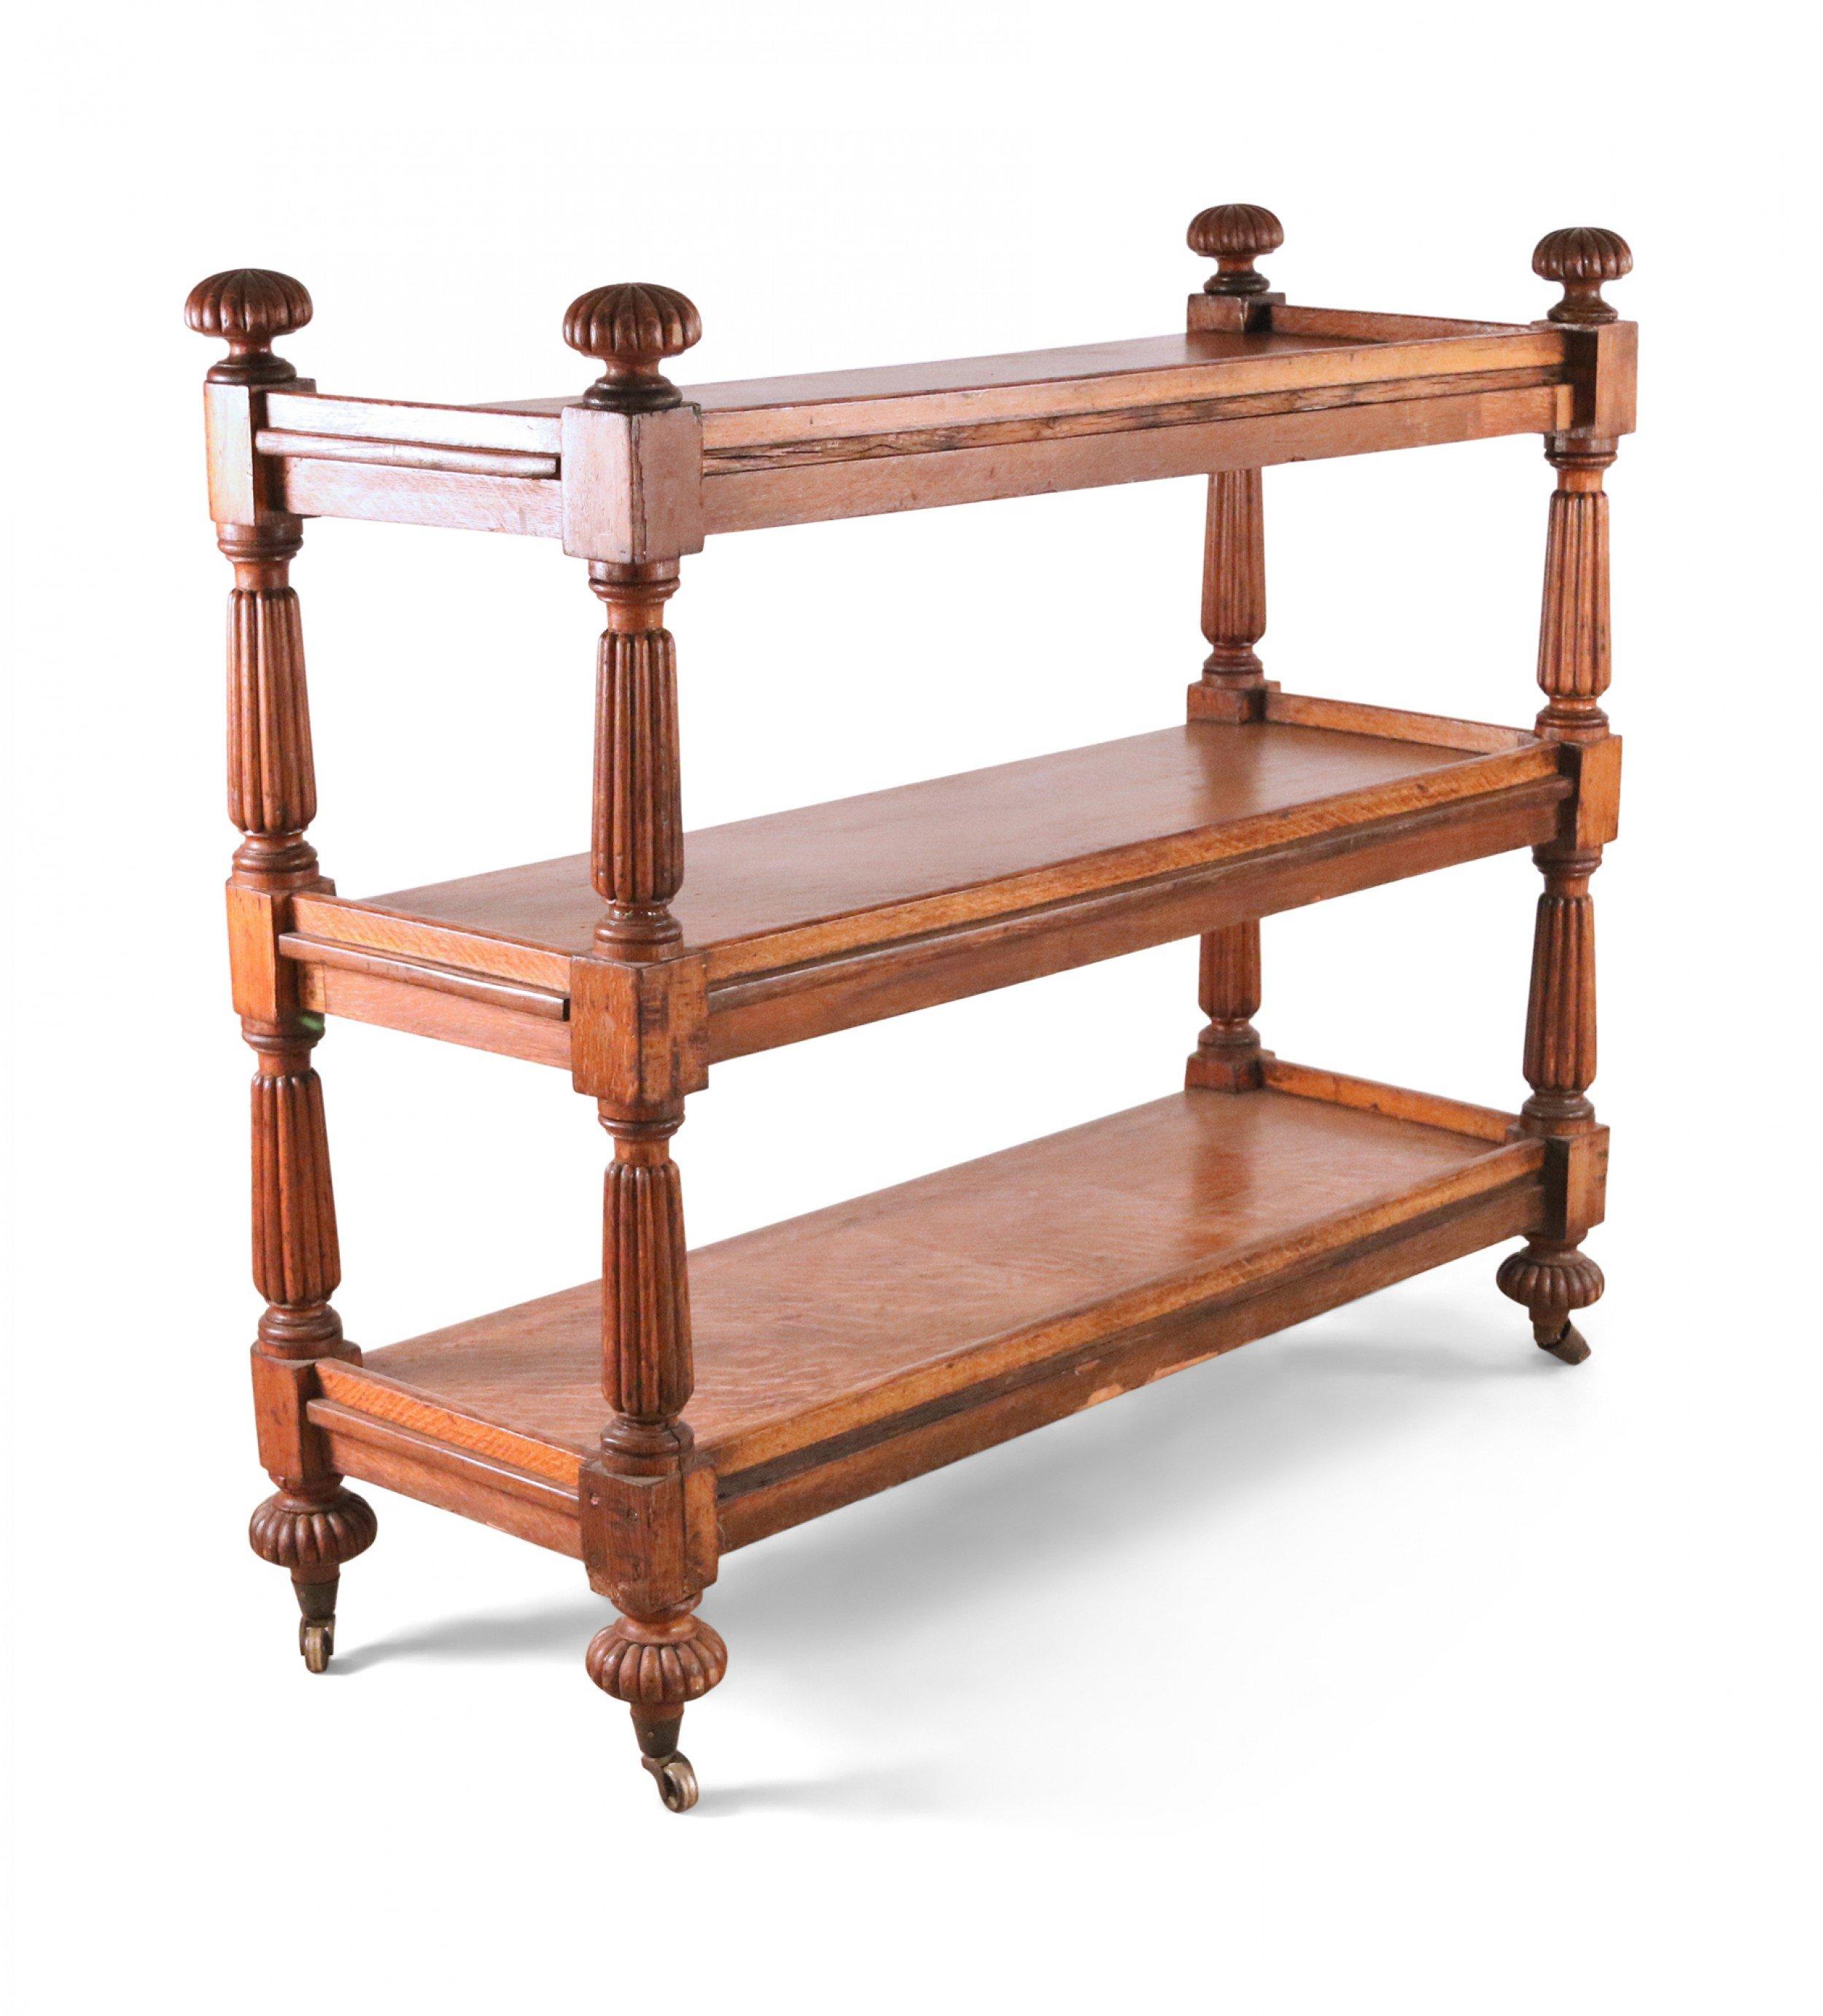 English Regency style oak three shelf étagère with reeded ball finials and supports on casters.
 